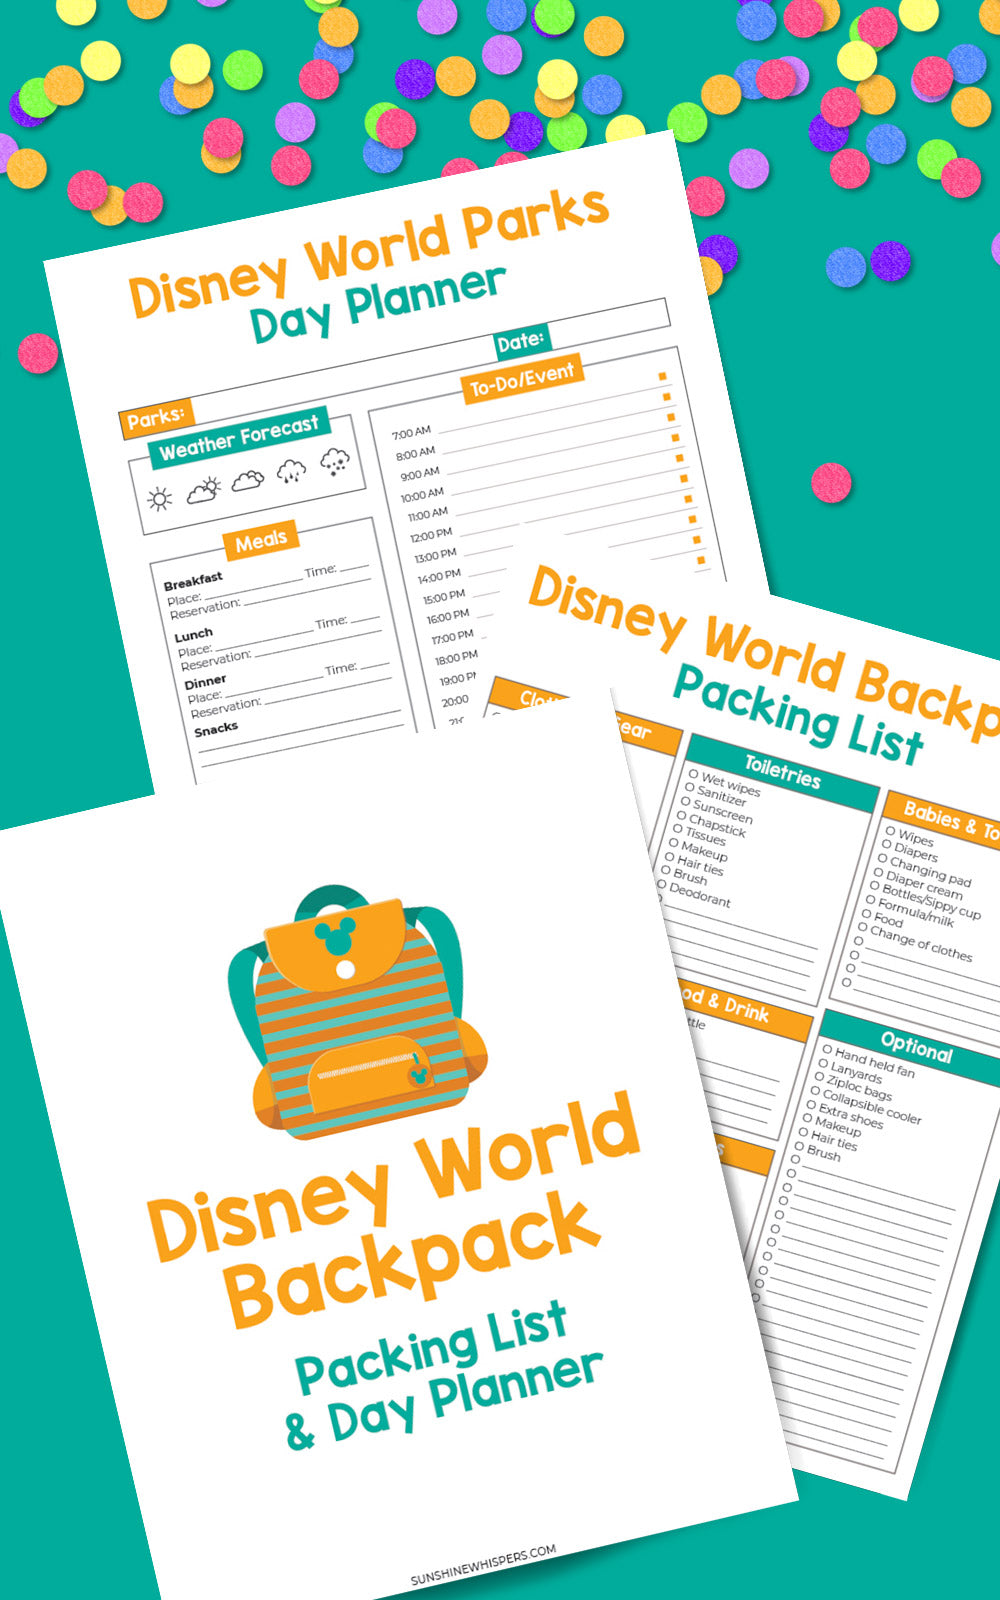 Disney World Backpack and Day Planner